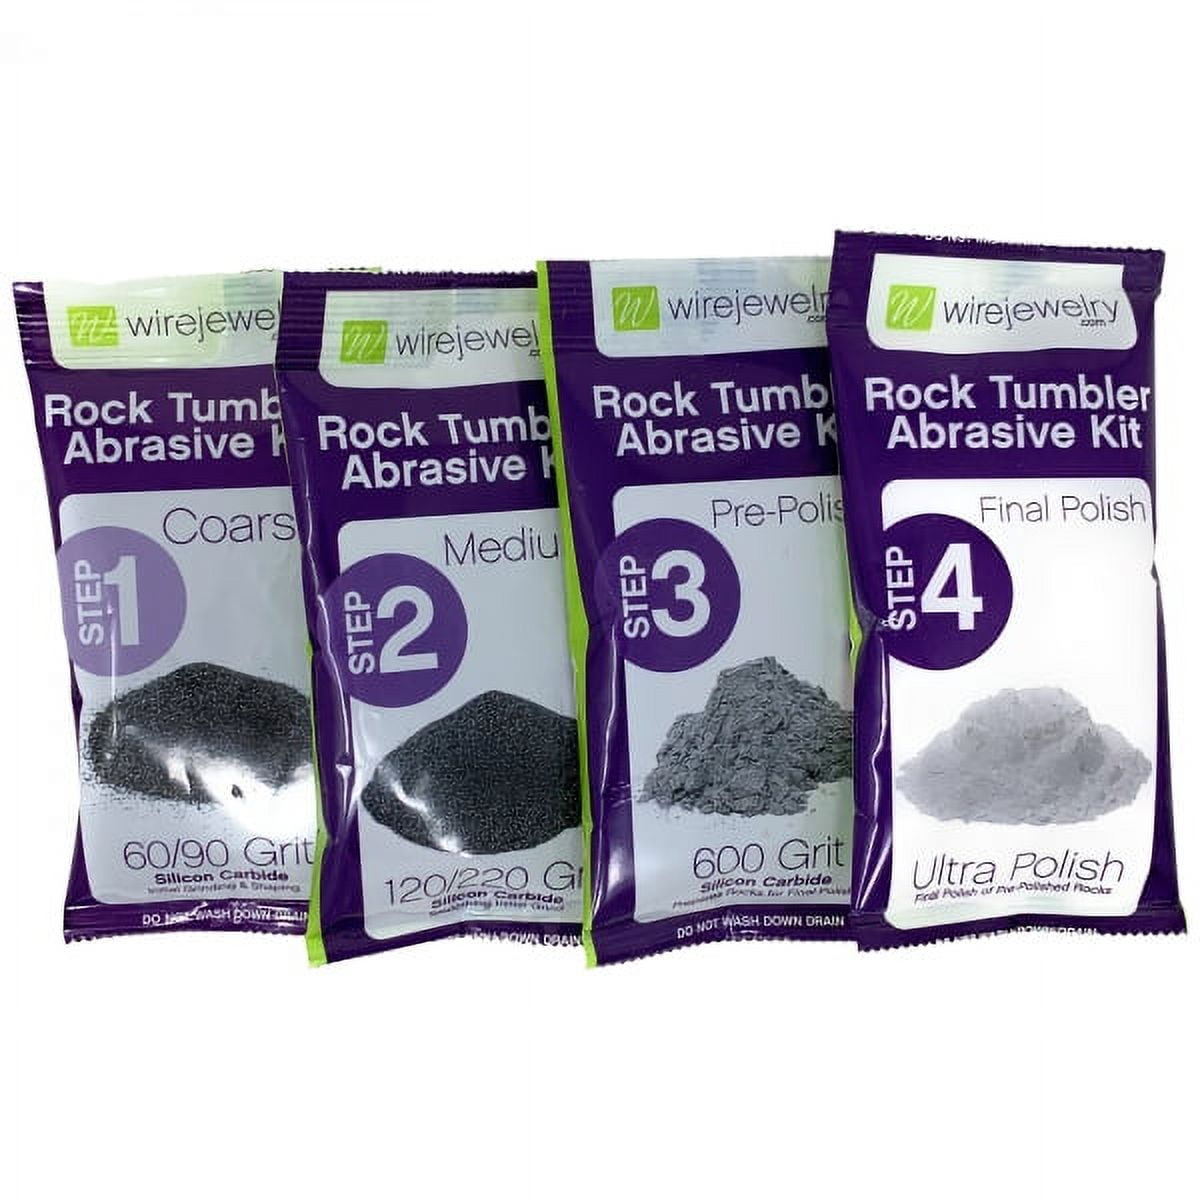 Tryes Rock Tumbler Kit Adults-Rock Polisher Tumbler with Noise Reduction Cover, Speed&Timer Control, Complete Rock Tumbling Kit,Learning Guide etc.